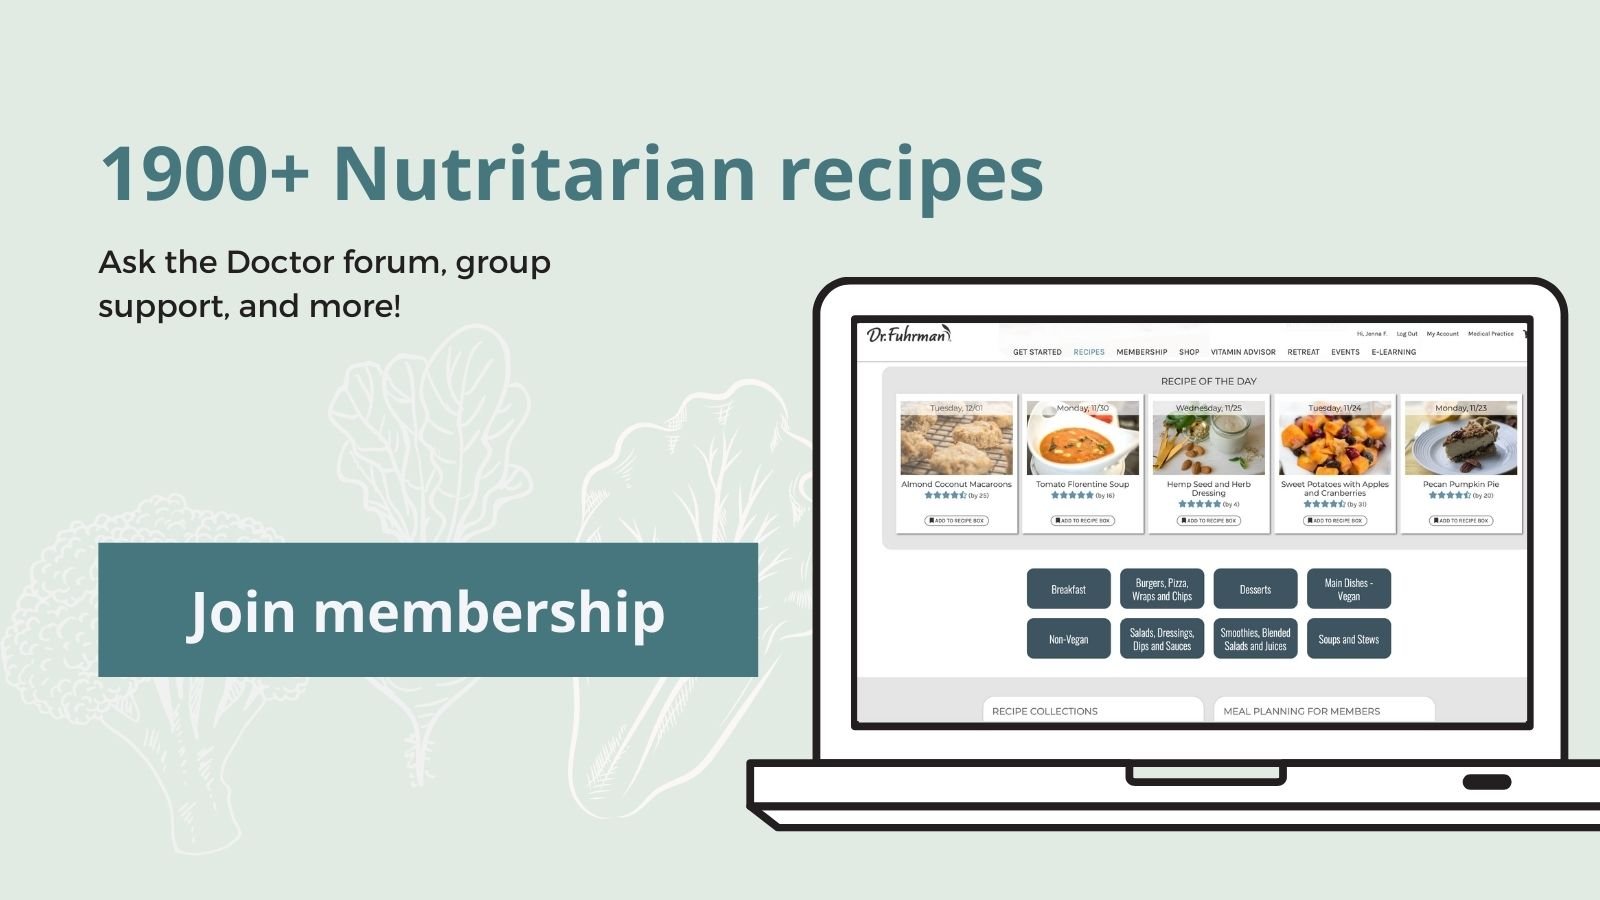 Membership gives you access to 1900+ recipes